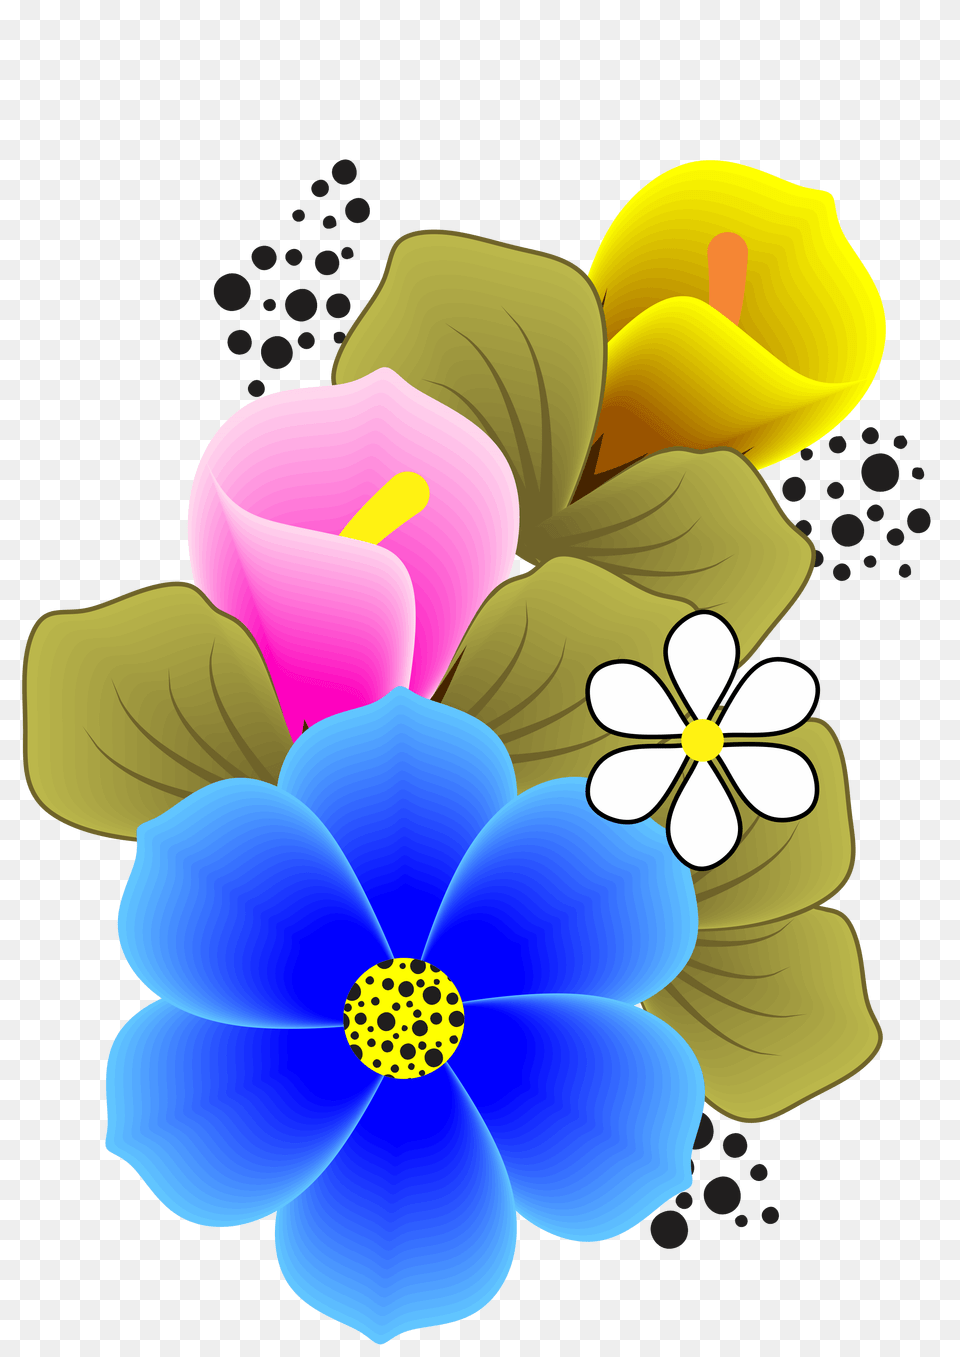 Flower Plus In Flowers, Anemone, Art, Floral Design, Graphics Free Transparent Png